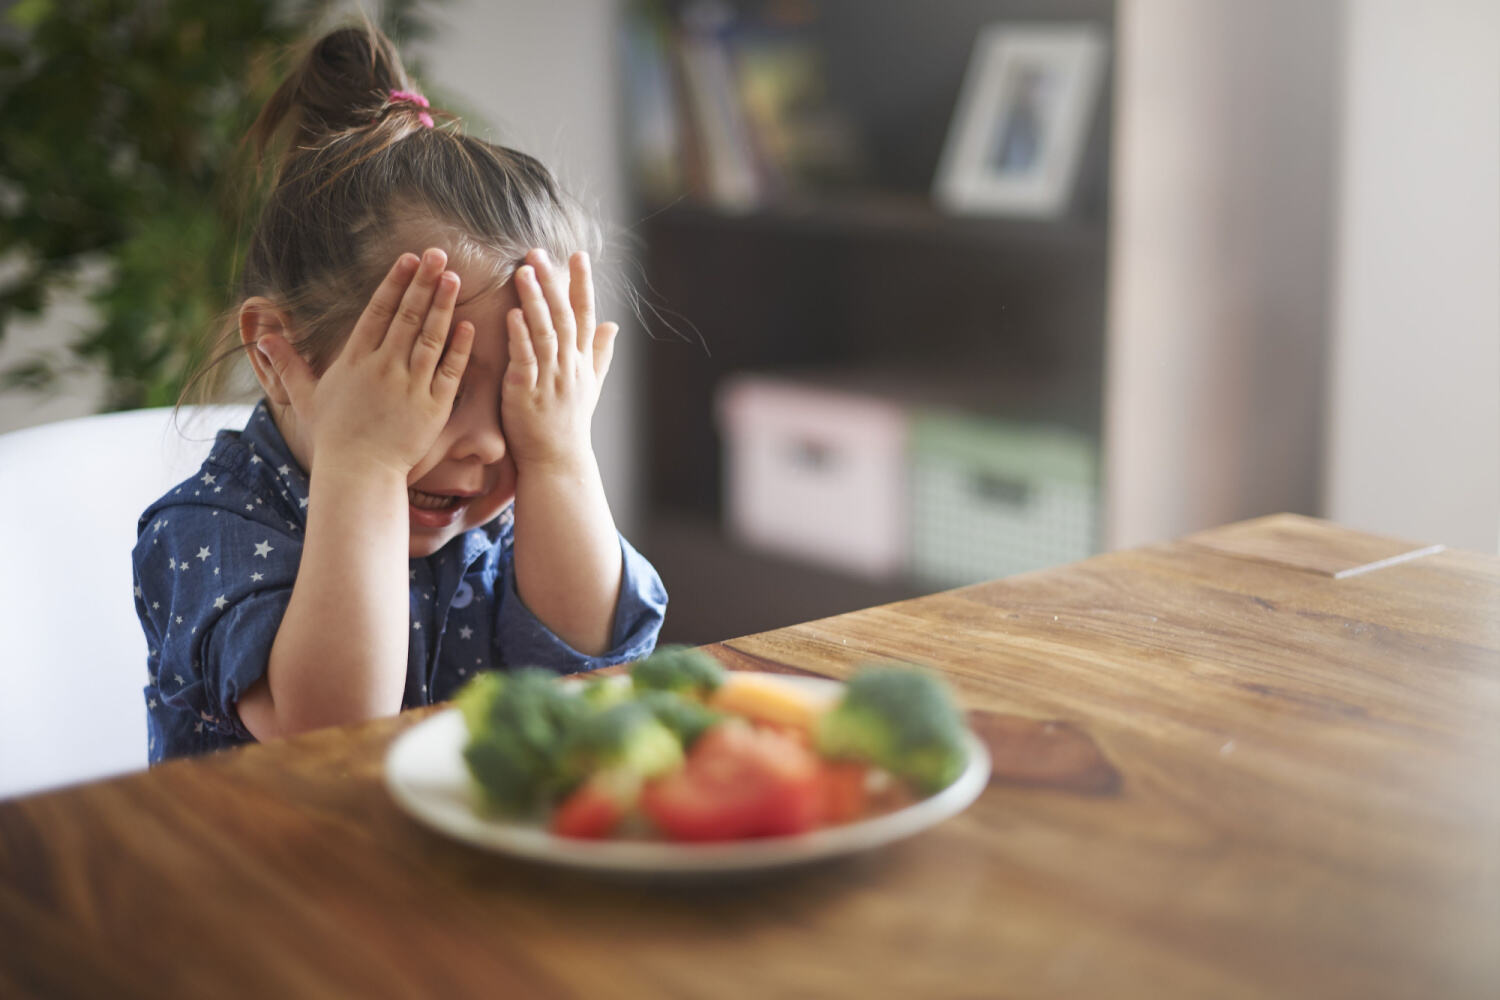 Tips to tackle fussy eating in toddlers